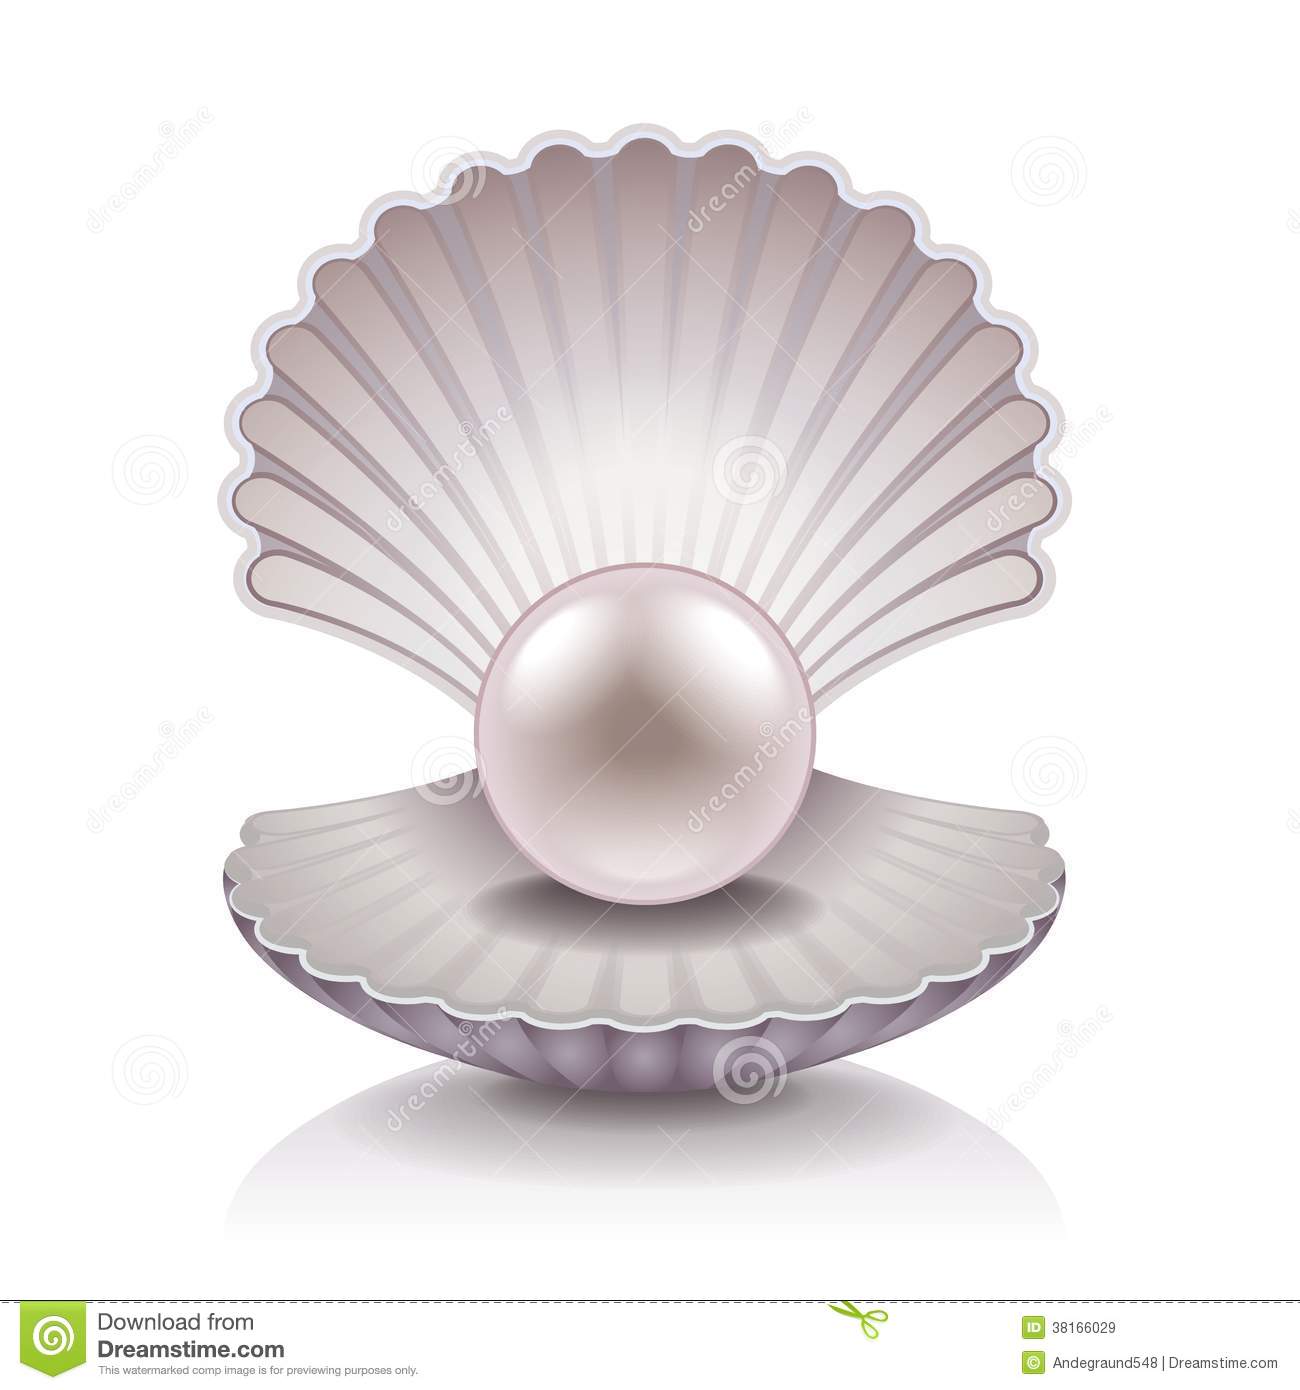 Shell With Pearl Vector Illustration Royalty Free Stock Images   Image